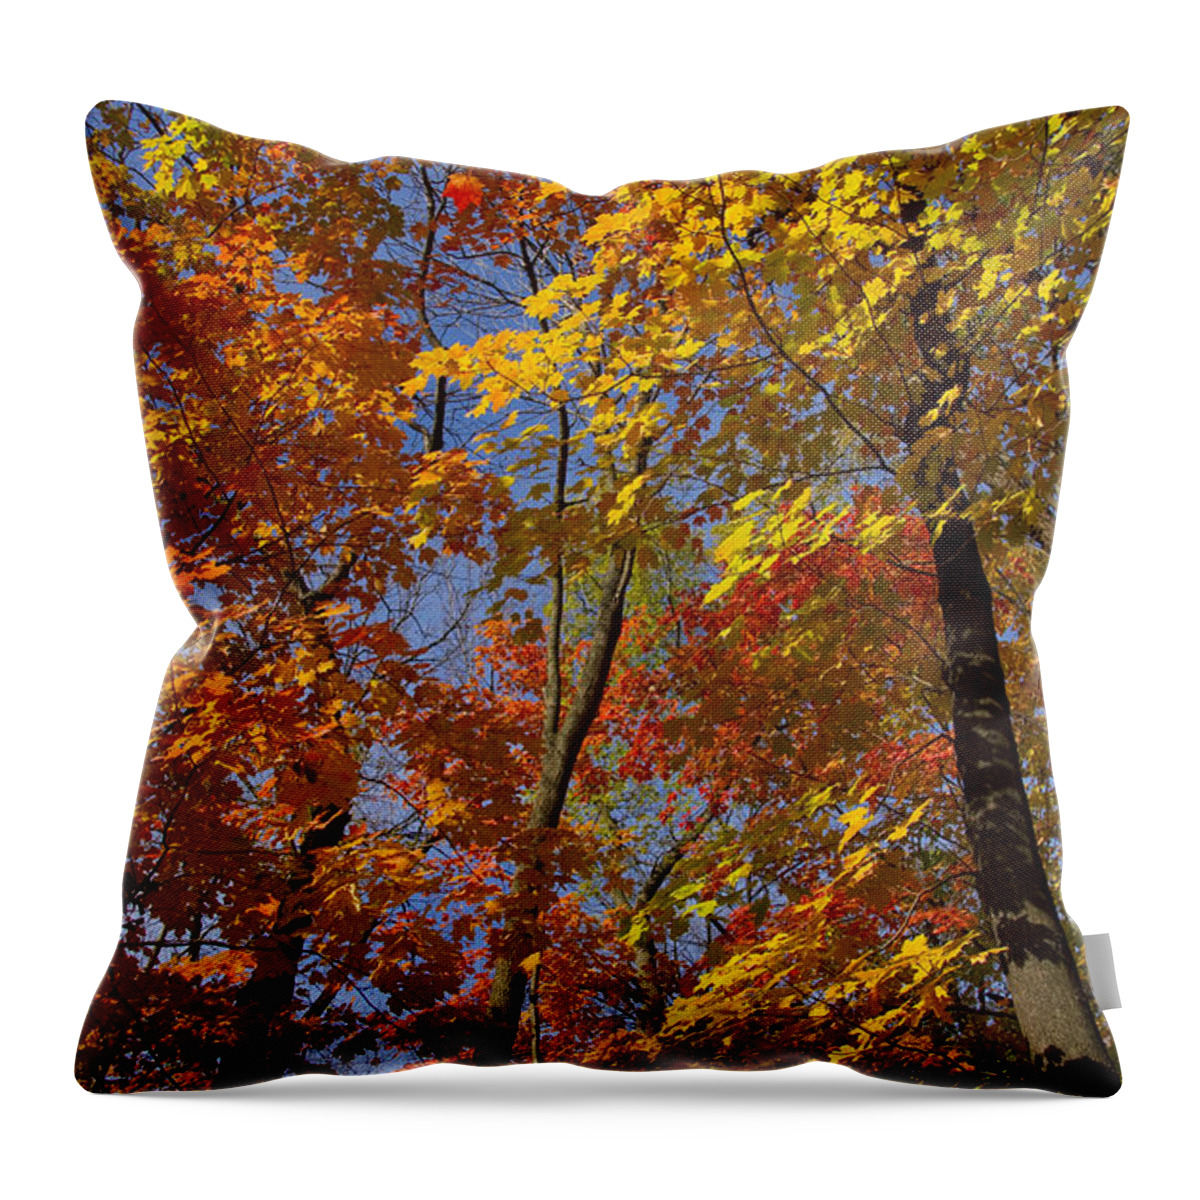 Autumn Throw Pillow featuring the photograph Autumn Glory by Larry Bohlin